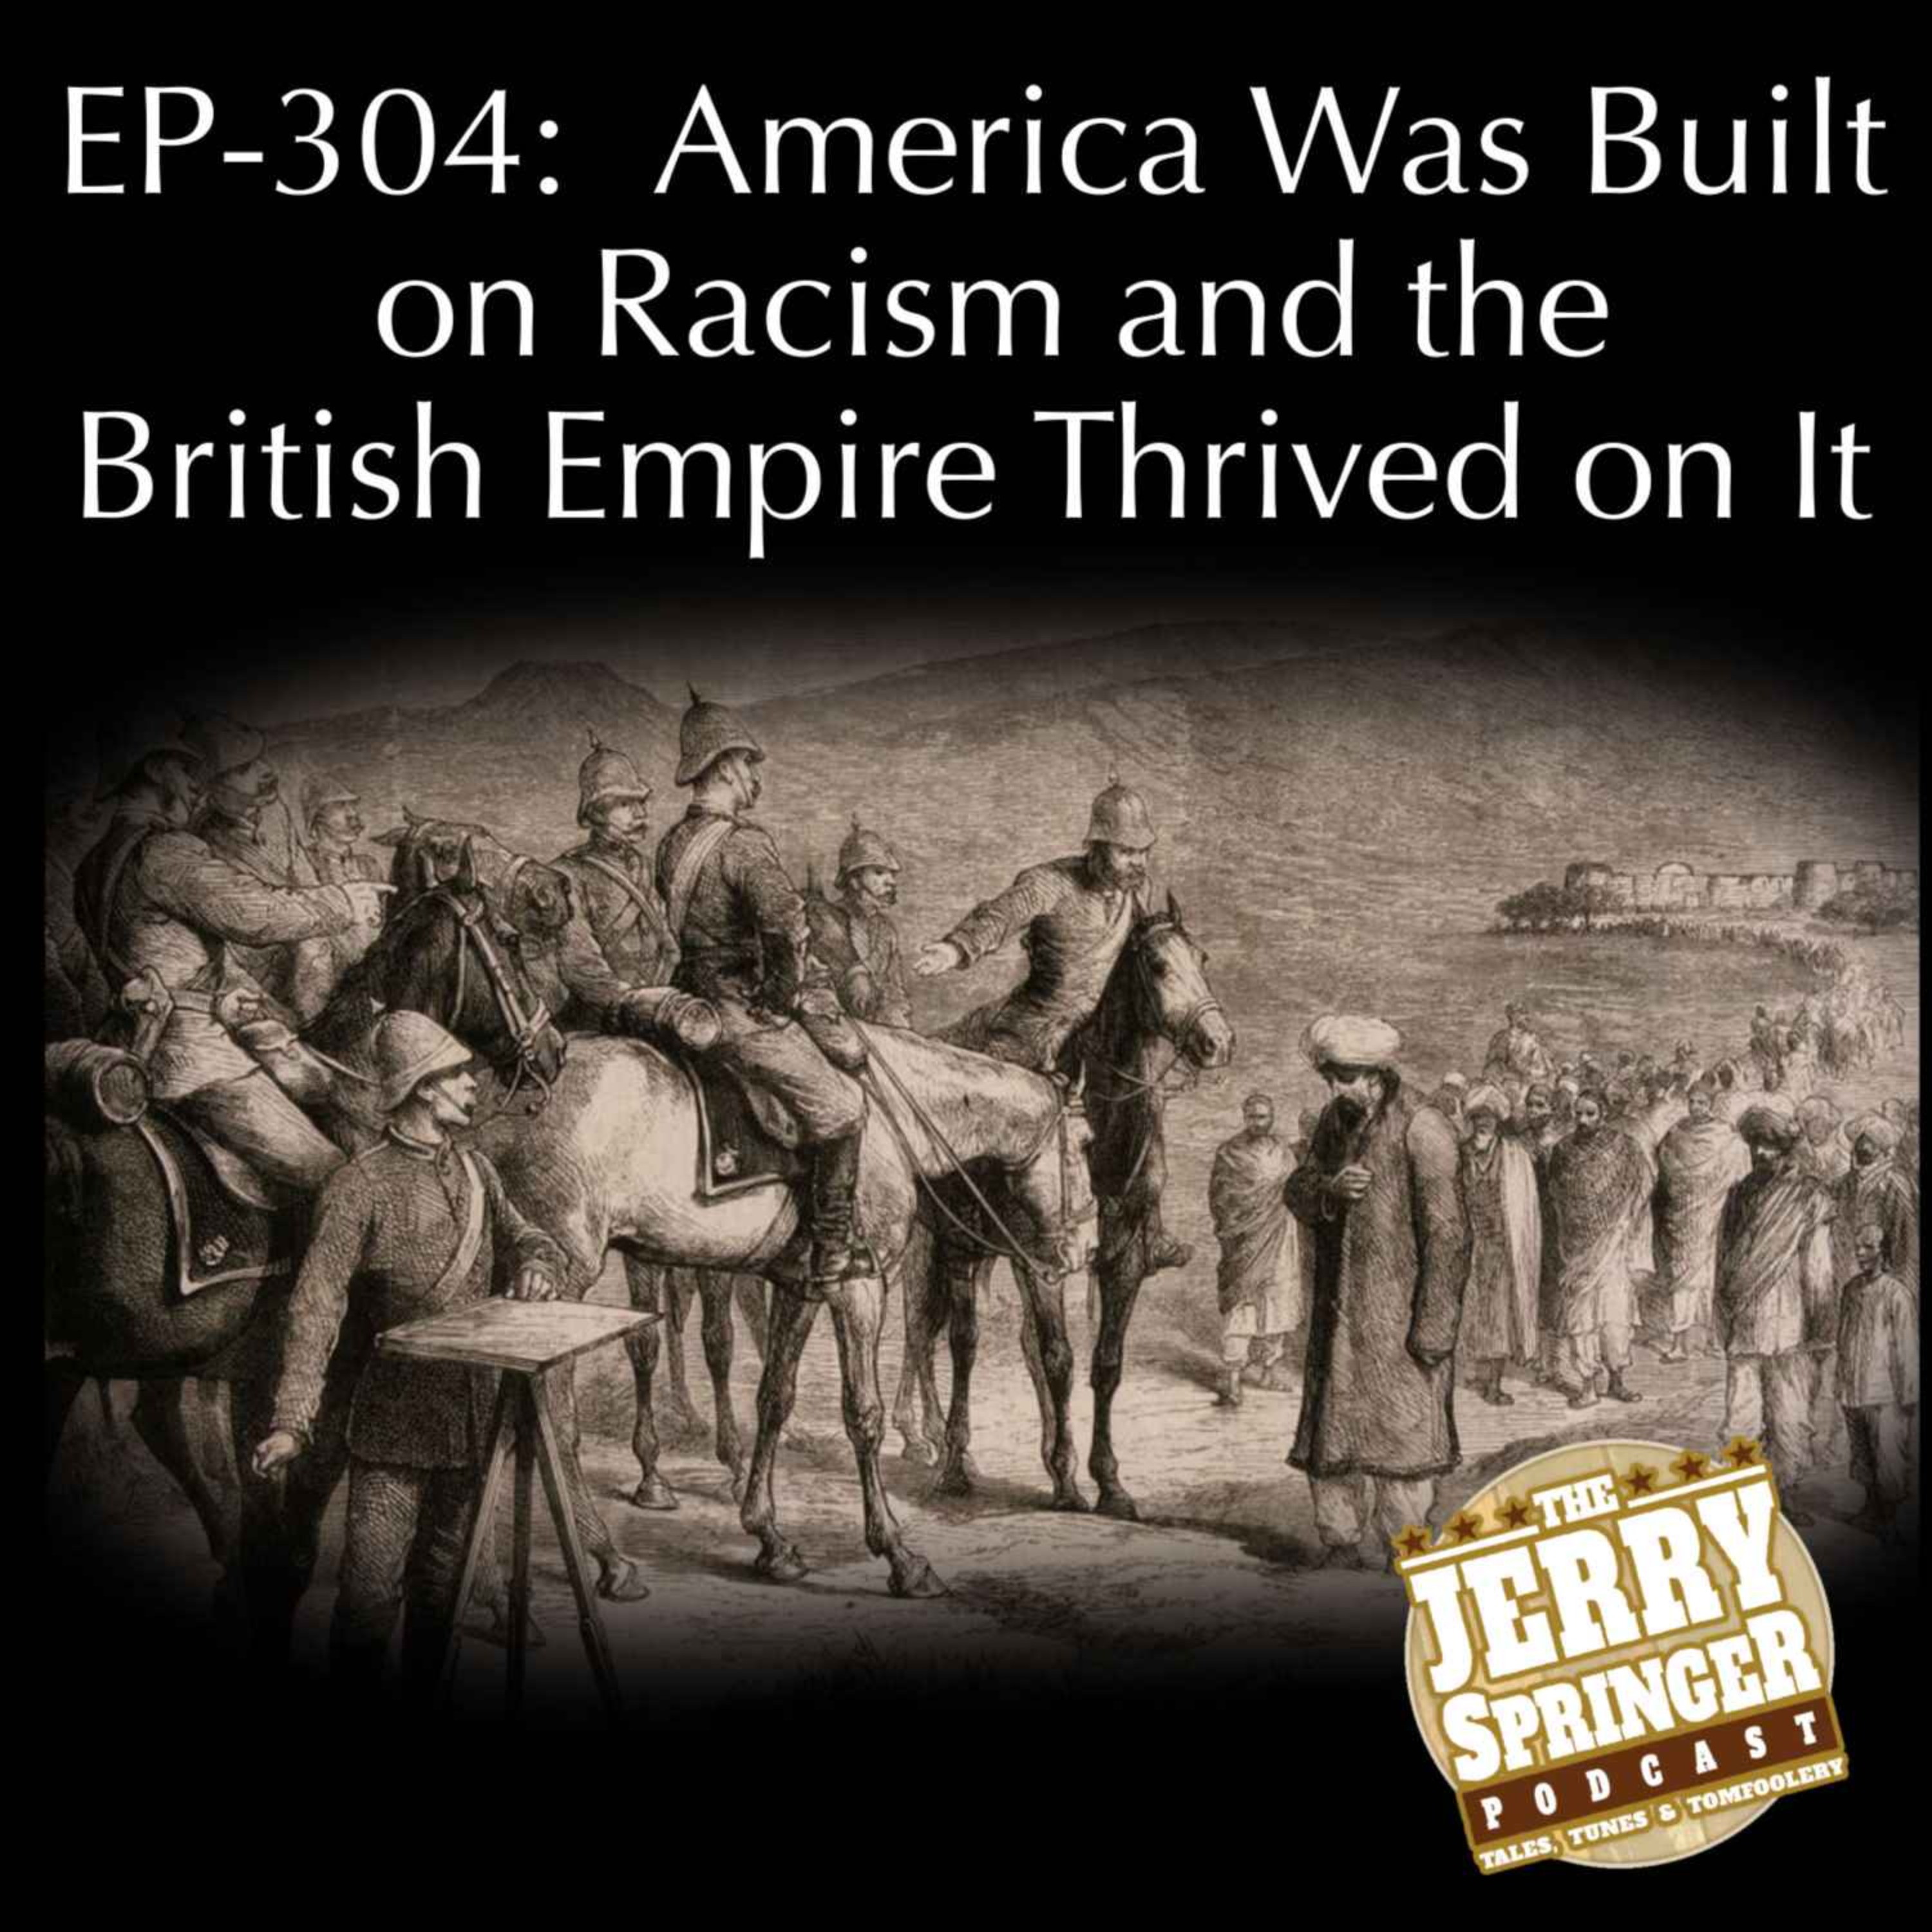 America Was Built on Racism and the British Empire Thrived on It: EP-304